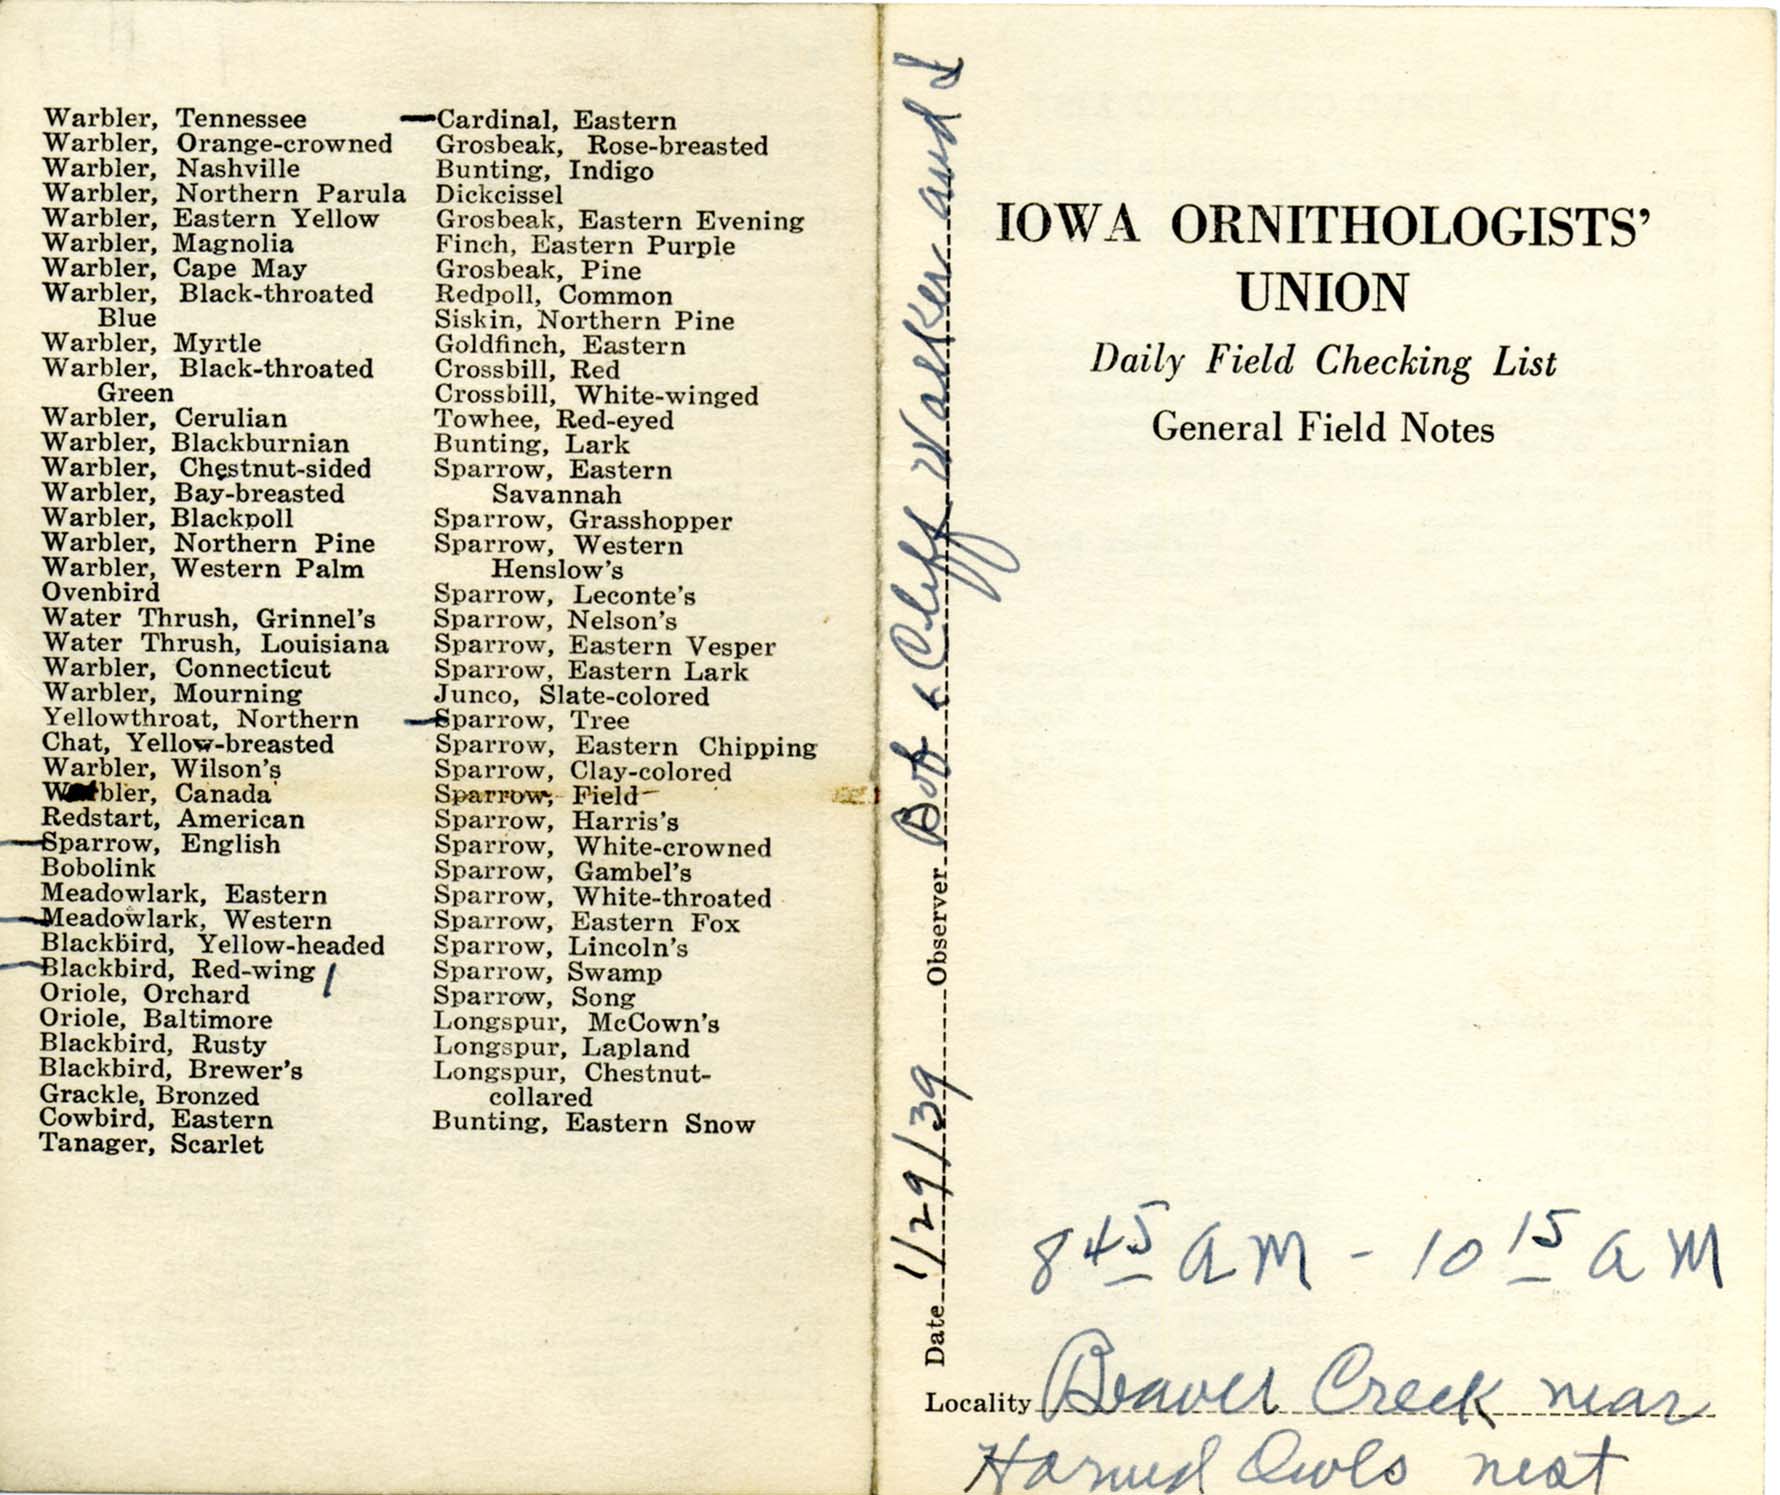 Daily field checking list by Walter Rosene, January 29, 1939